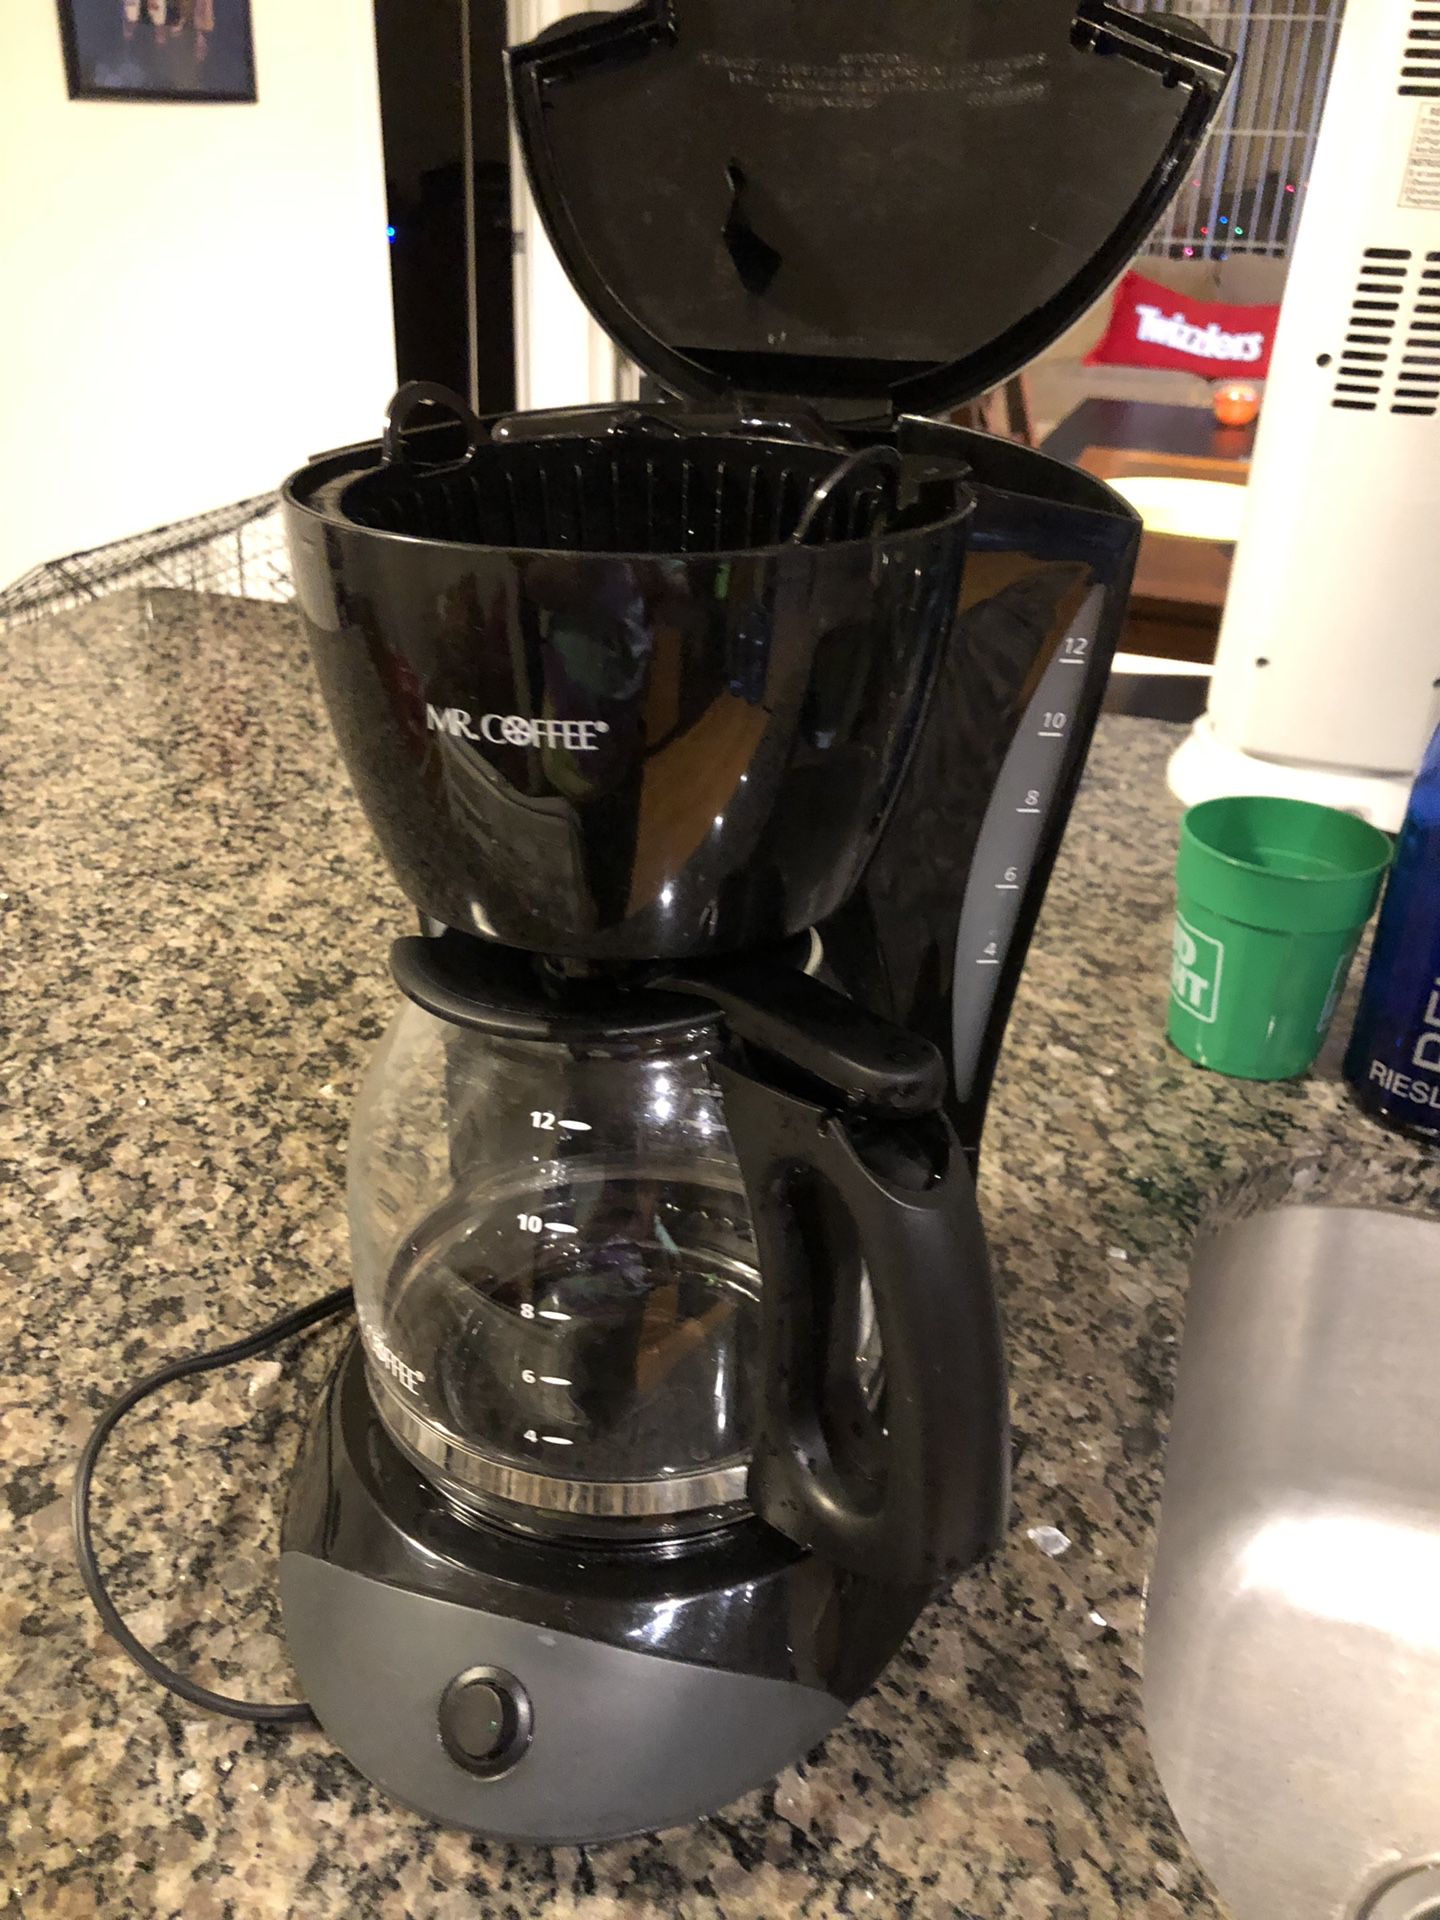 Free 12 cup coffee maker